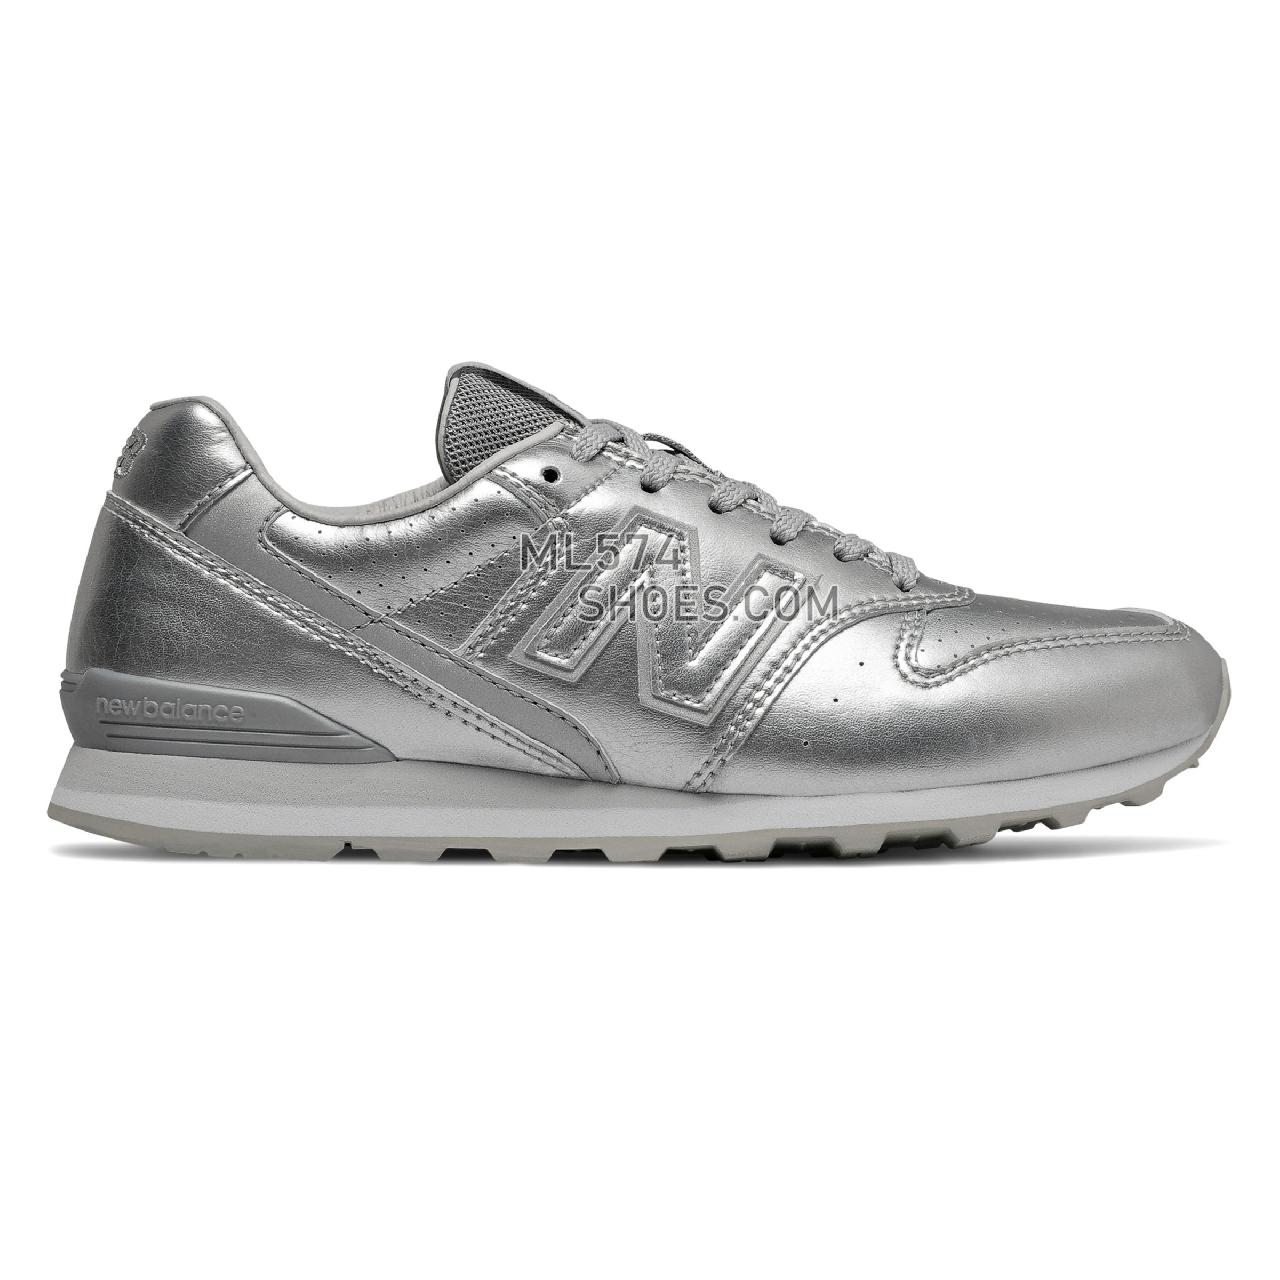 New Balance 996 - Women's 996 Classic - Silver with Munsell White - WL996ALS